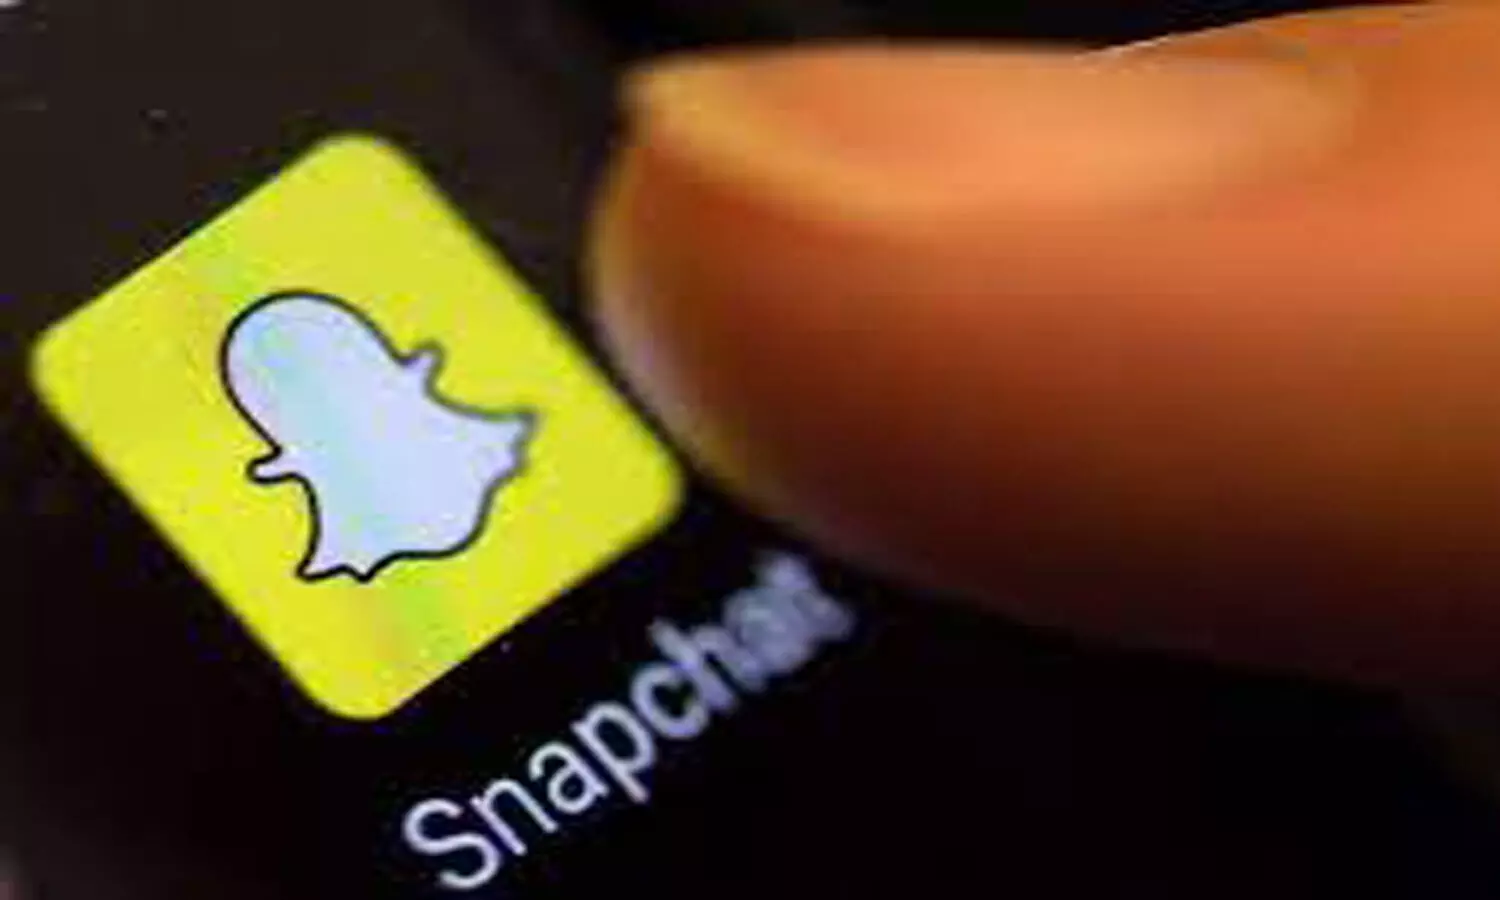 Snapchat Is Celebrating 100 Million Users in India With New Features